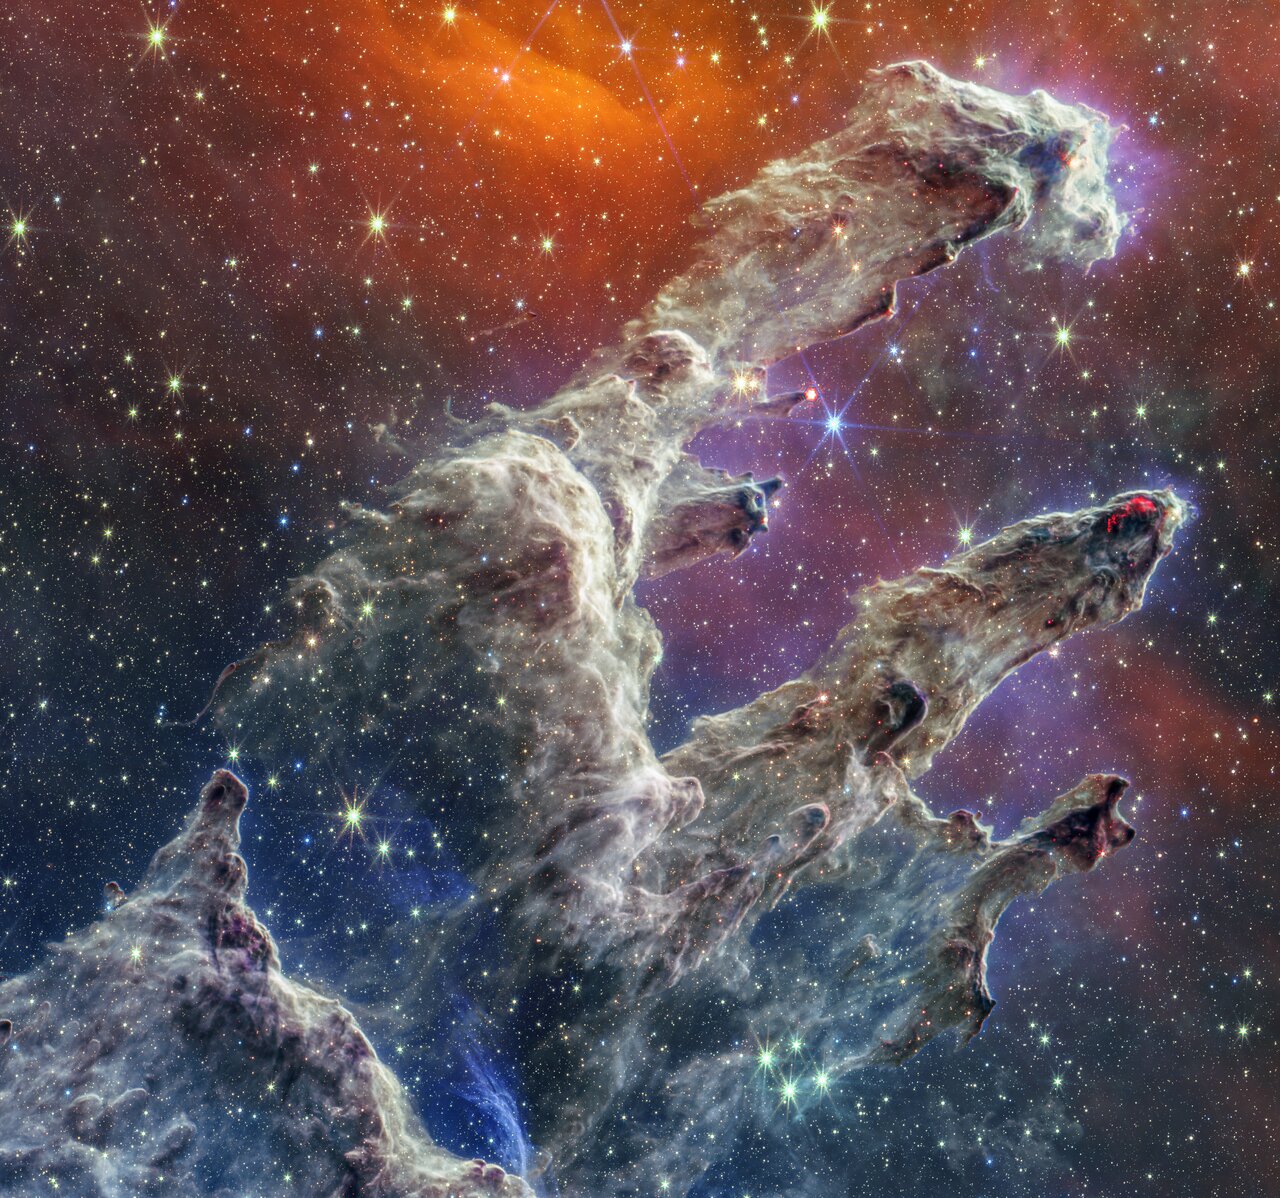 The Pillars of Creation as seen by NIRCam and MIRI from James Webb. Image Credit: NASA, ESA, CSA, STScI, J. DePasquale (STScI), A. Pagan (STScI), A. M. Koekemoer (STScI); CC BY 4.0.